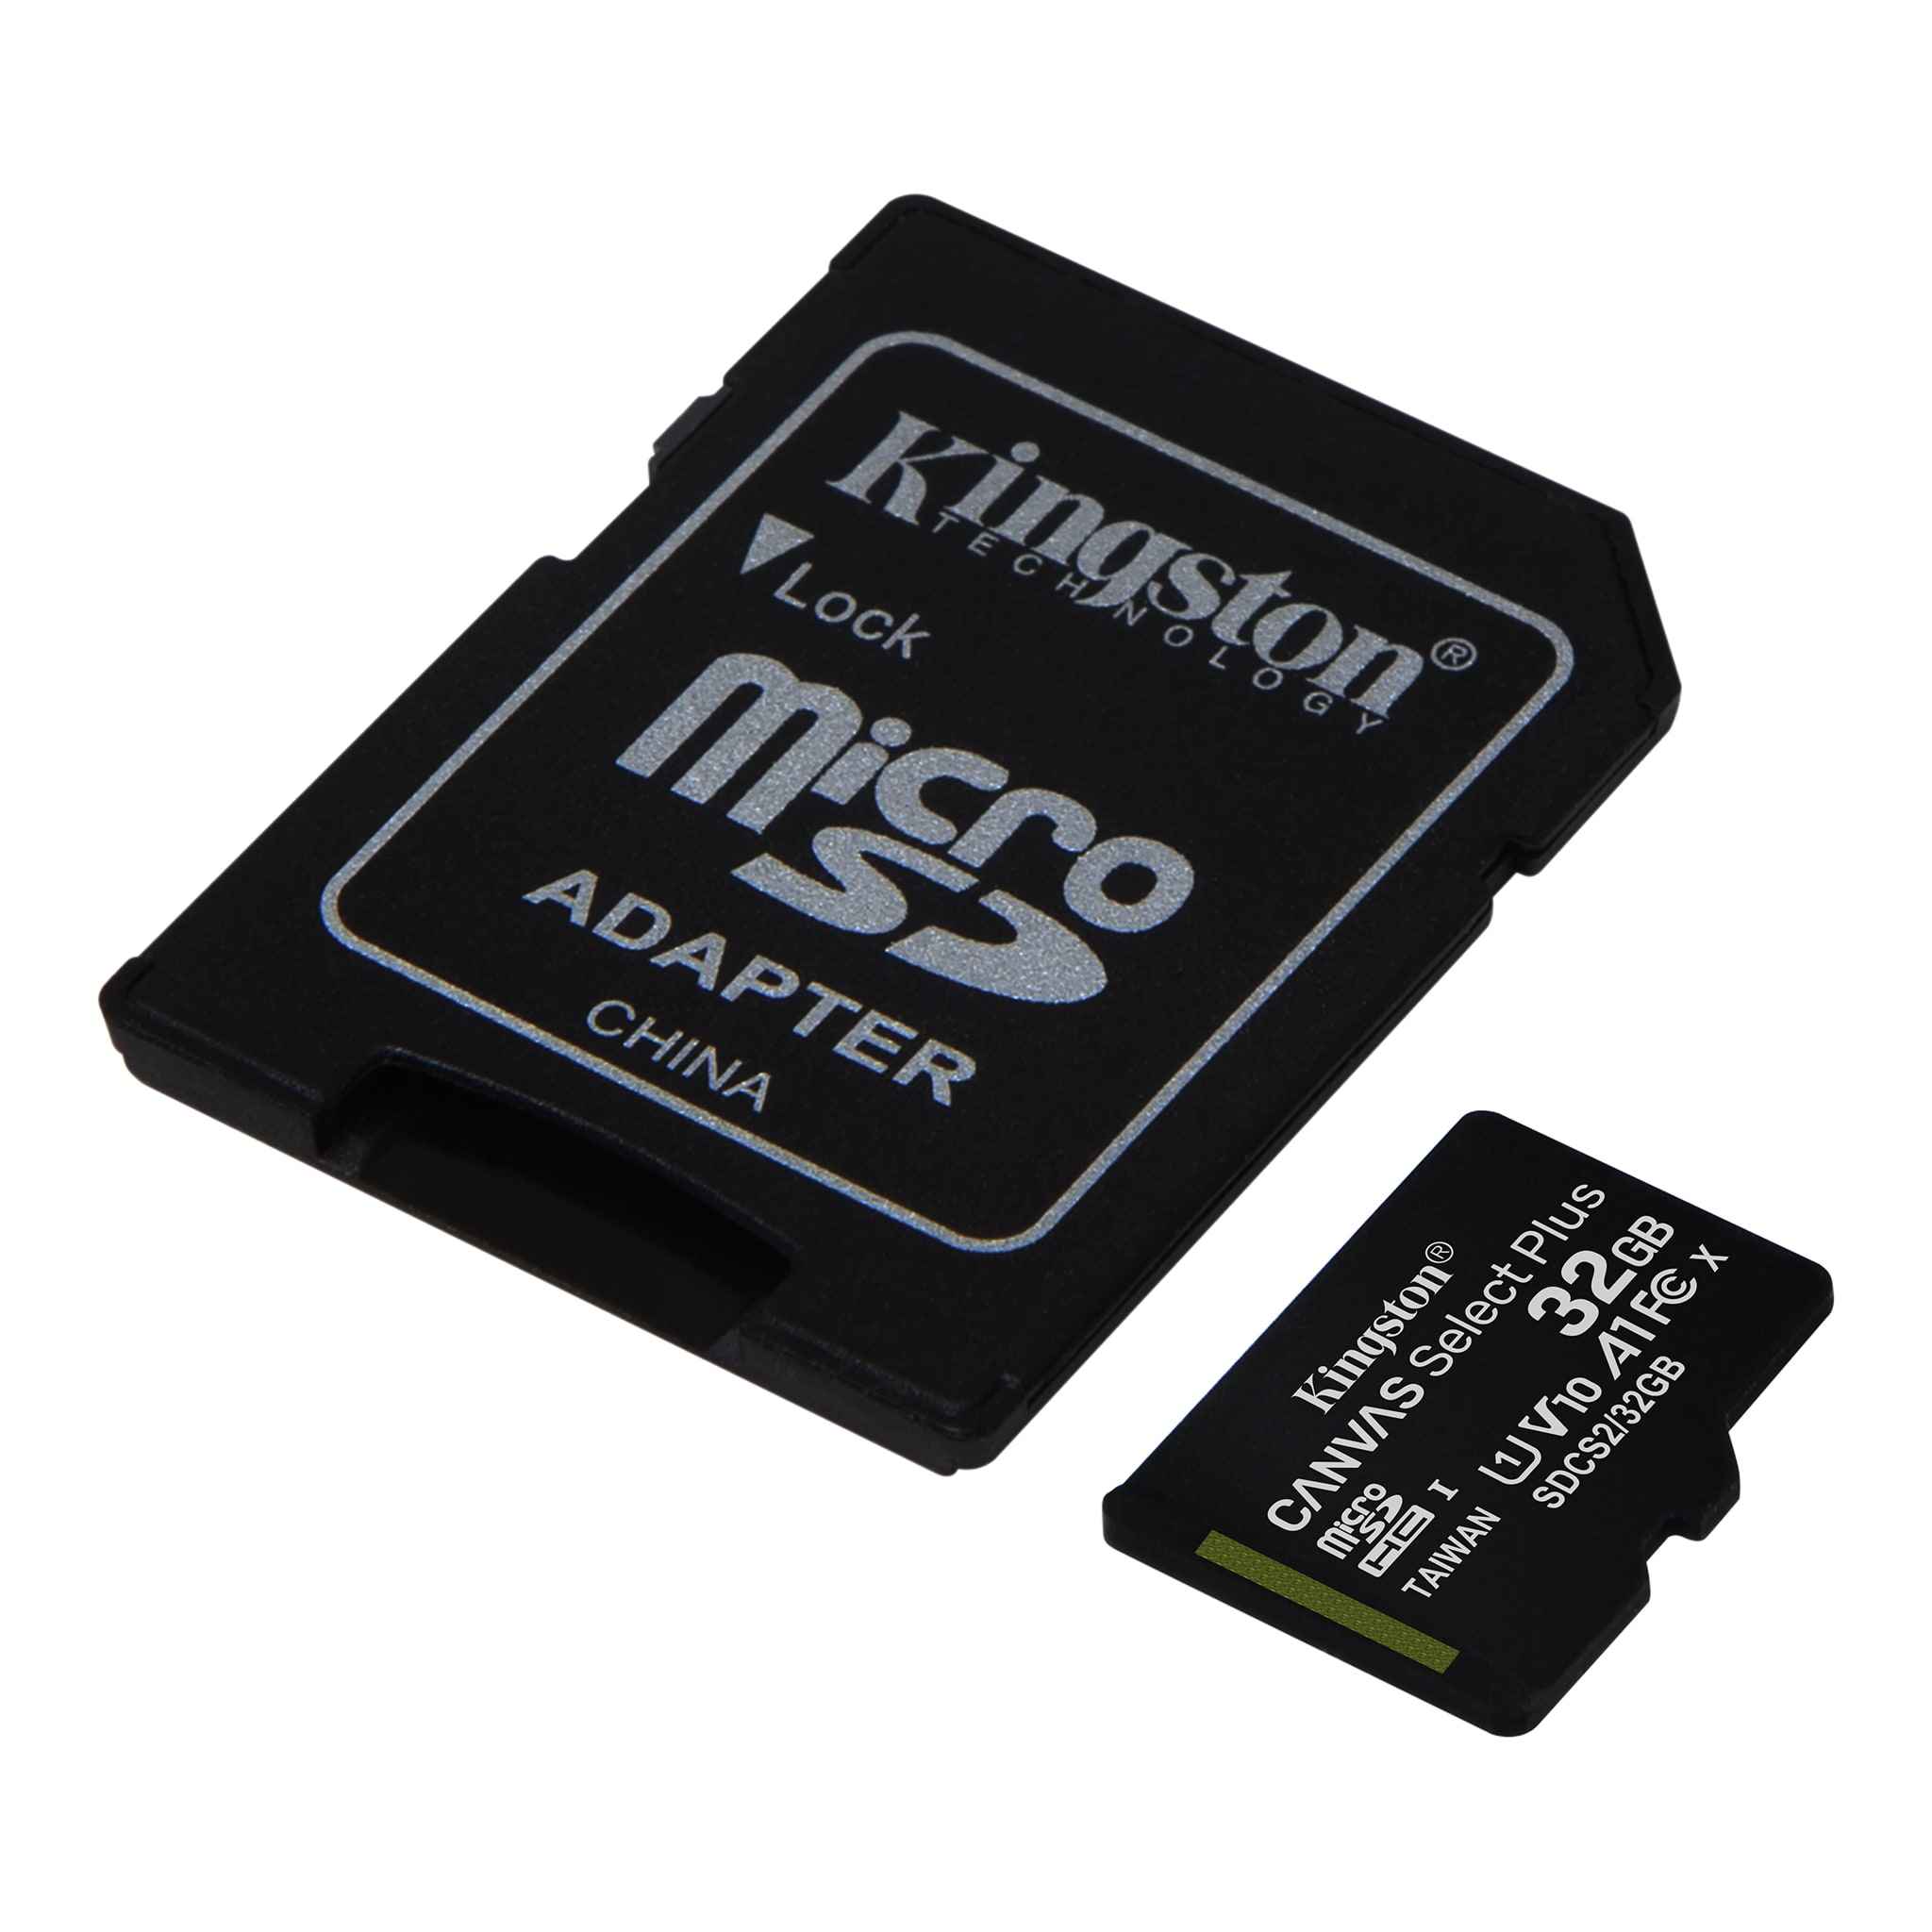 Kingston 512GB BLU Touchbook M7 MicroSDXC Canvas Select Plus Card Verified by SanFlash. 100MBs Works with Kingston 